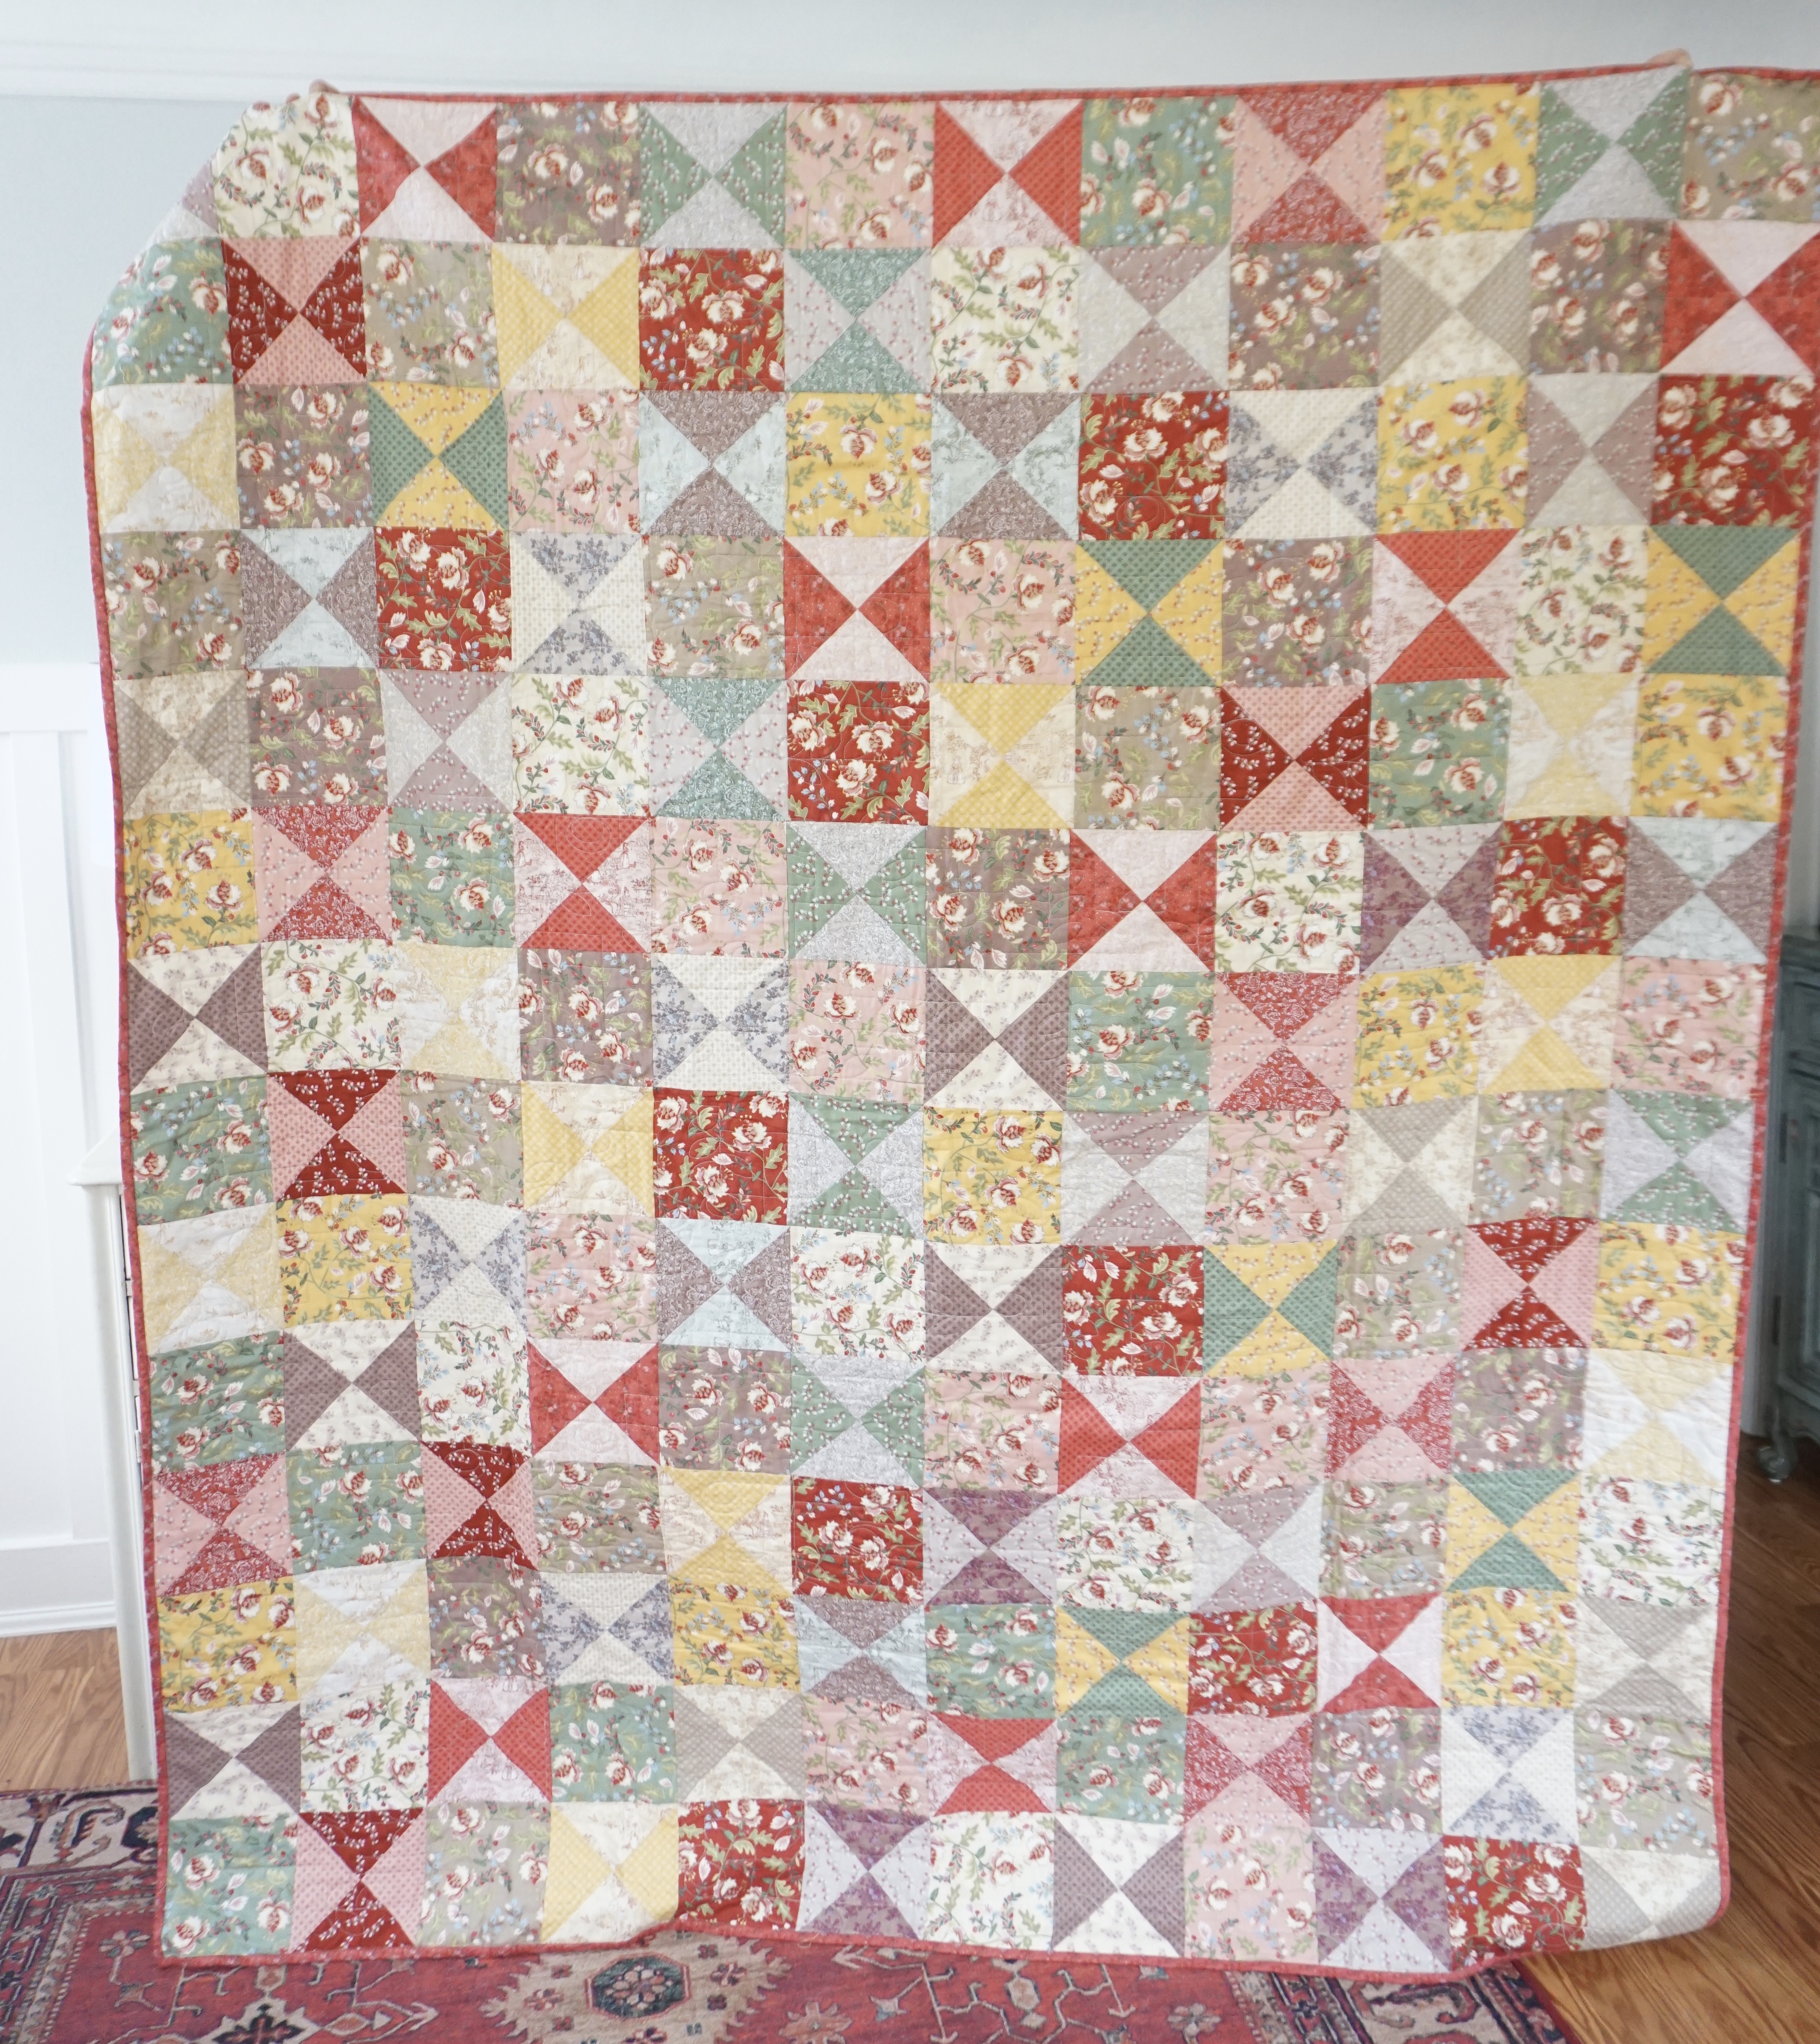 Quilt As You Go Holiday Stocking Kit - Hustle and Bustle